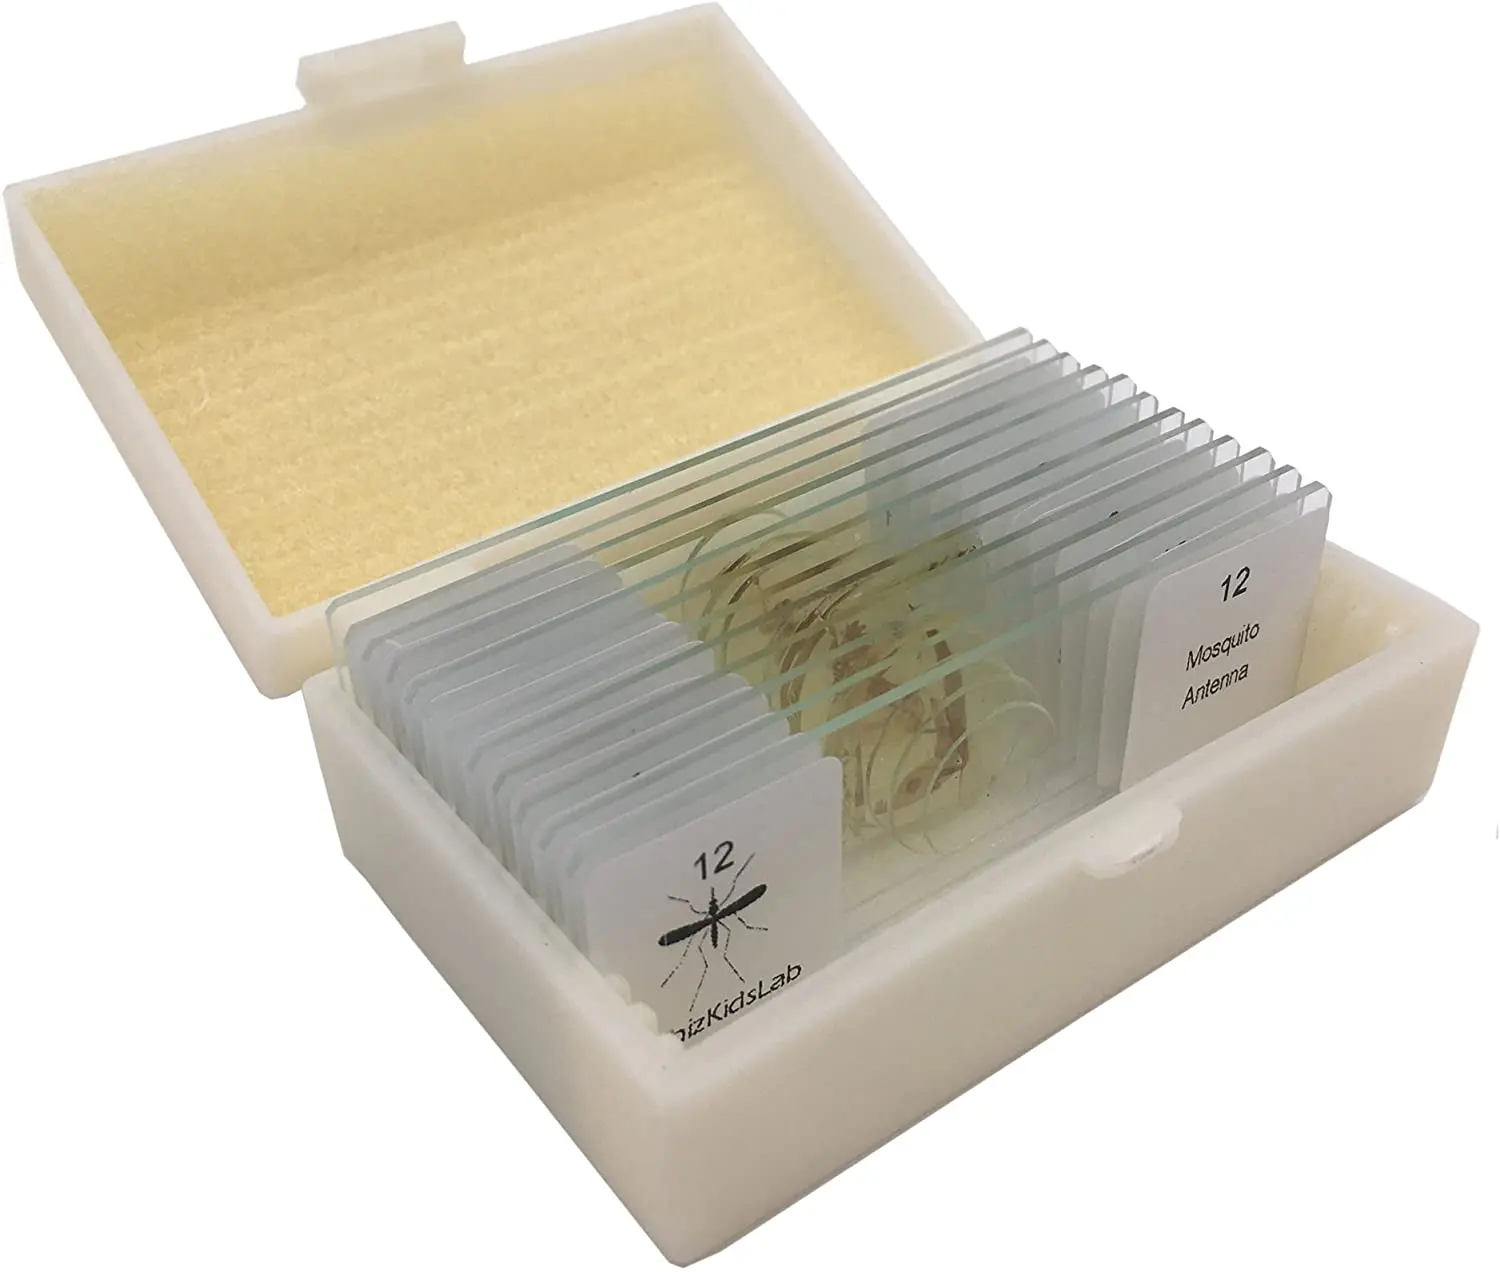 Laboratory Research Insect medical glass prepared microscope slides with Specimen